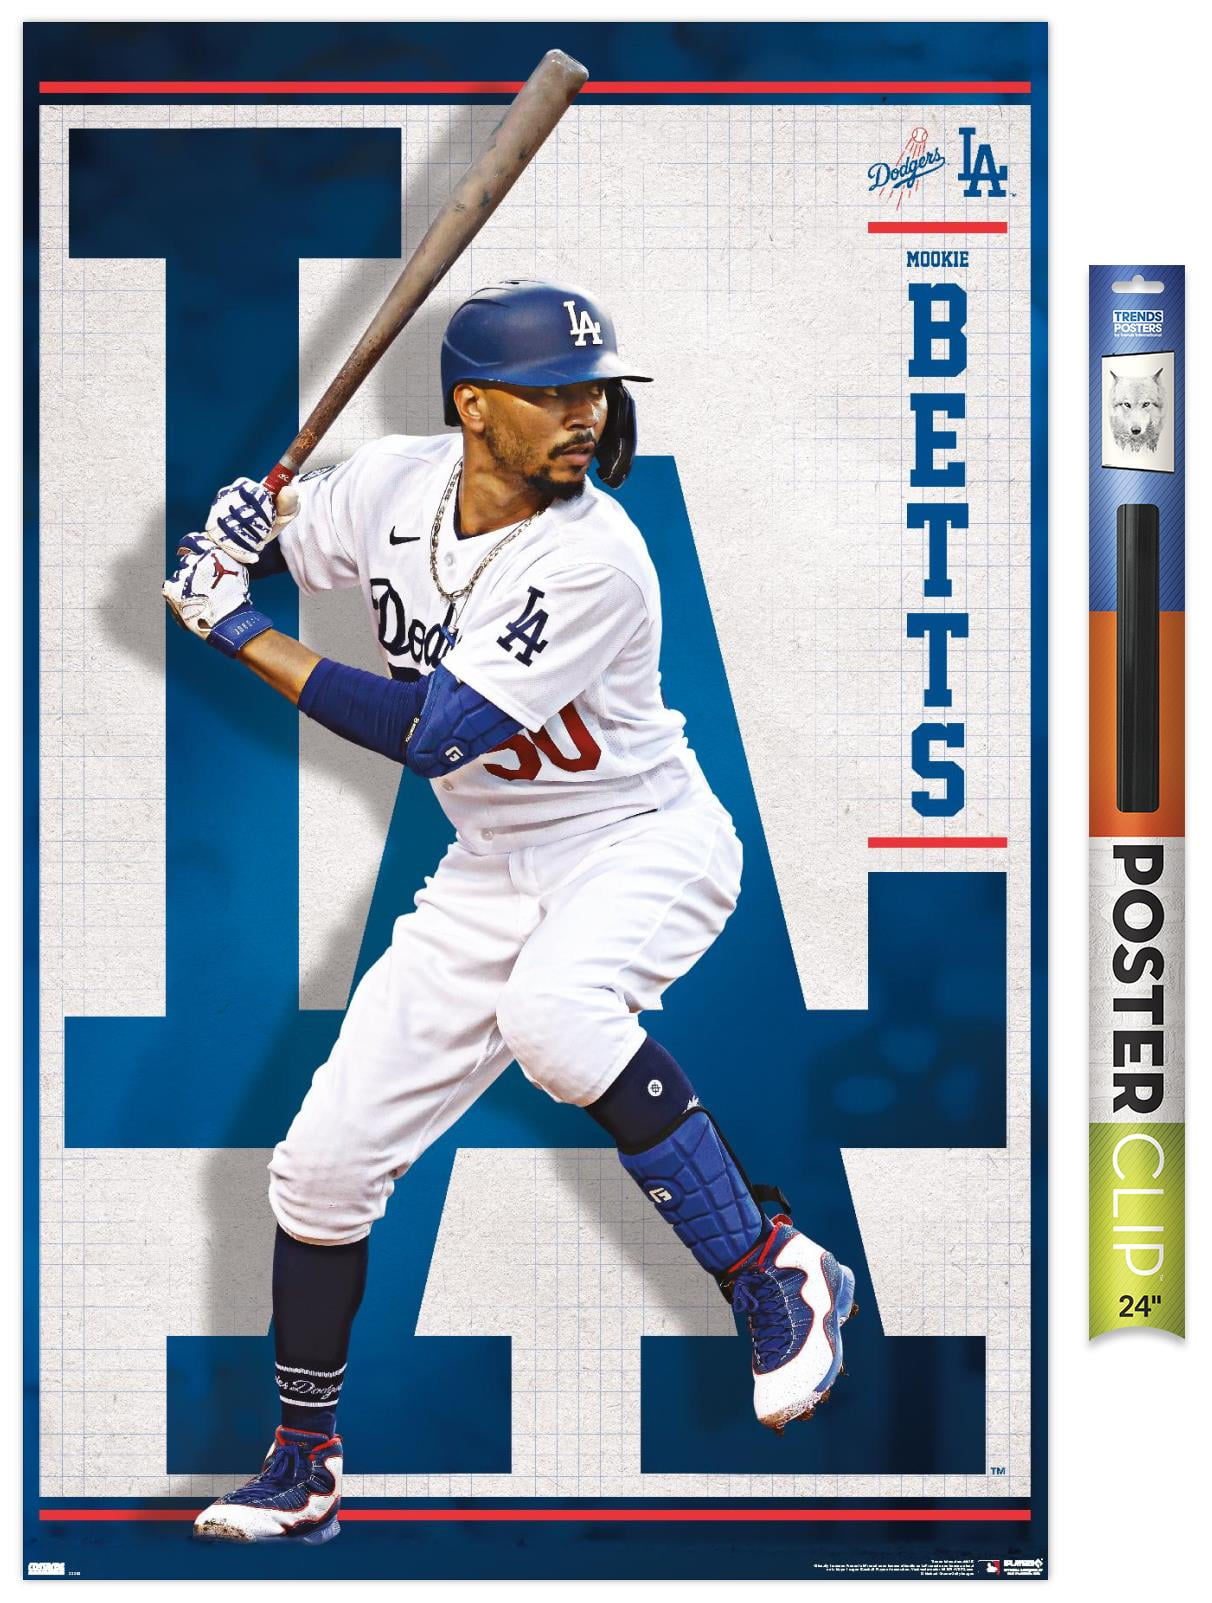 MLB Los Angeles Dodgers - Mookie Betts 22 Wall Poster, 22.375 x 34